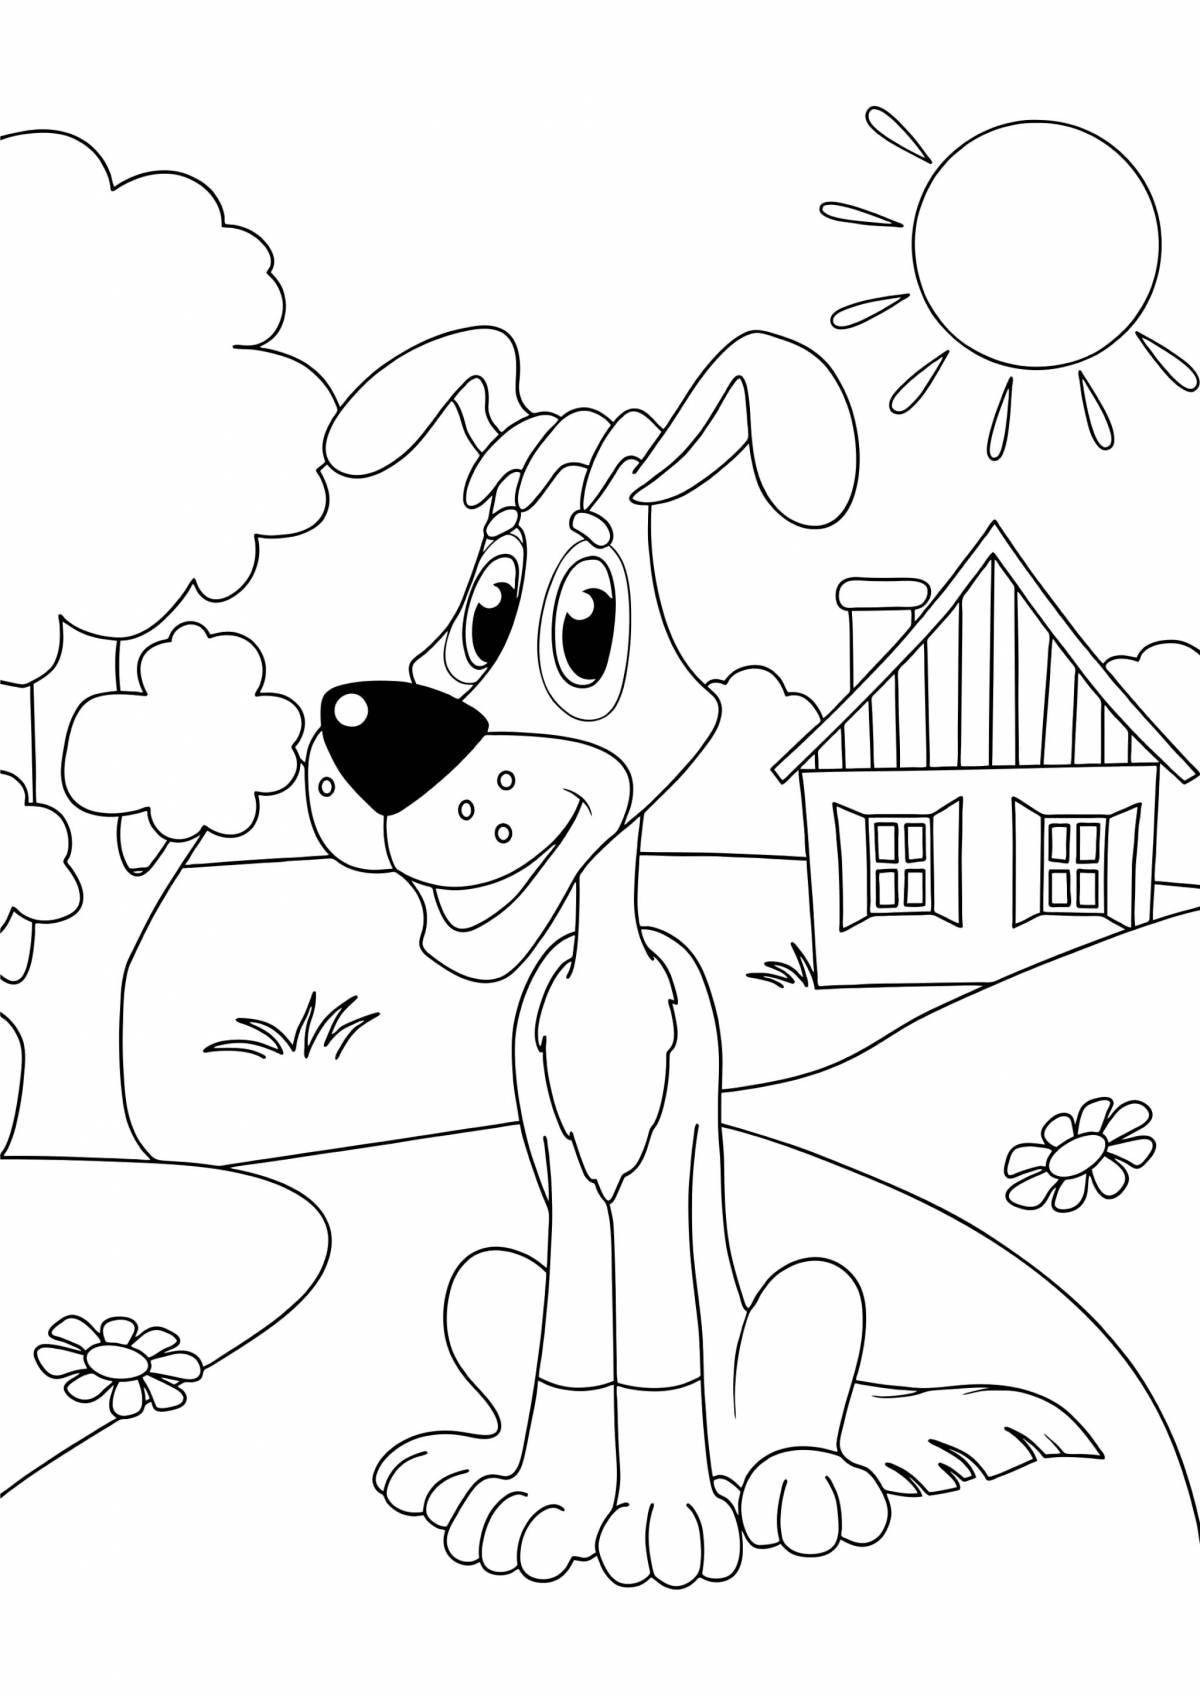 Vibrant sailor skin coloring page for toddlers